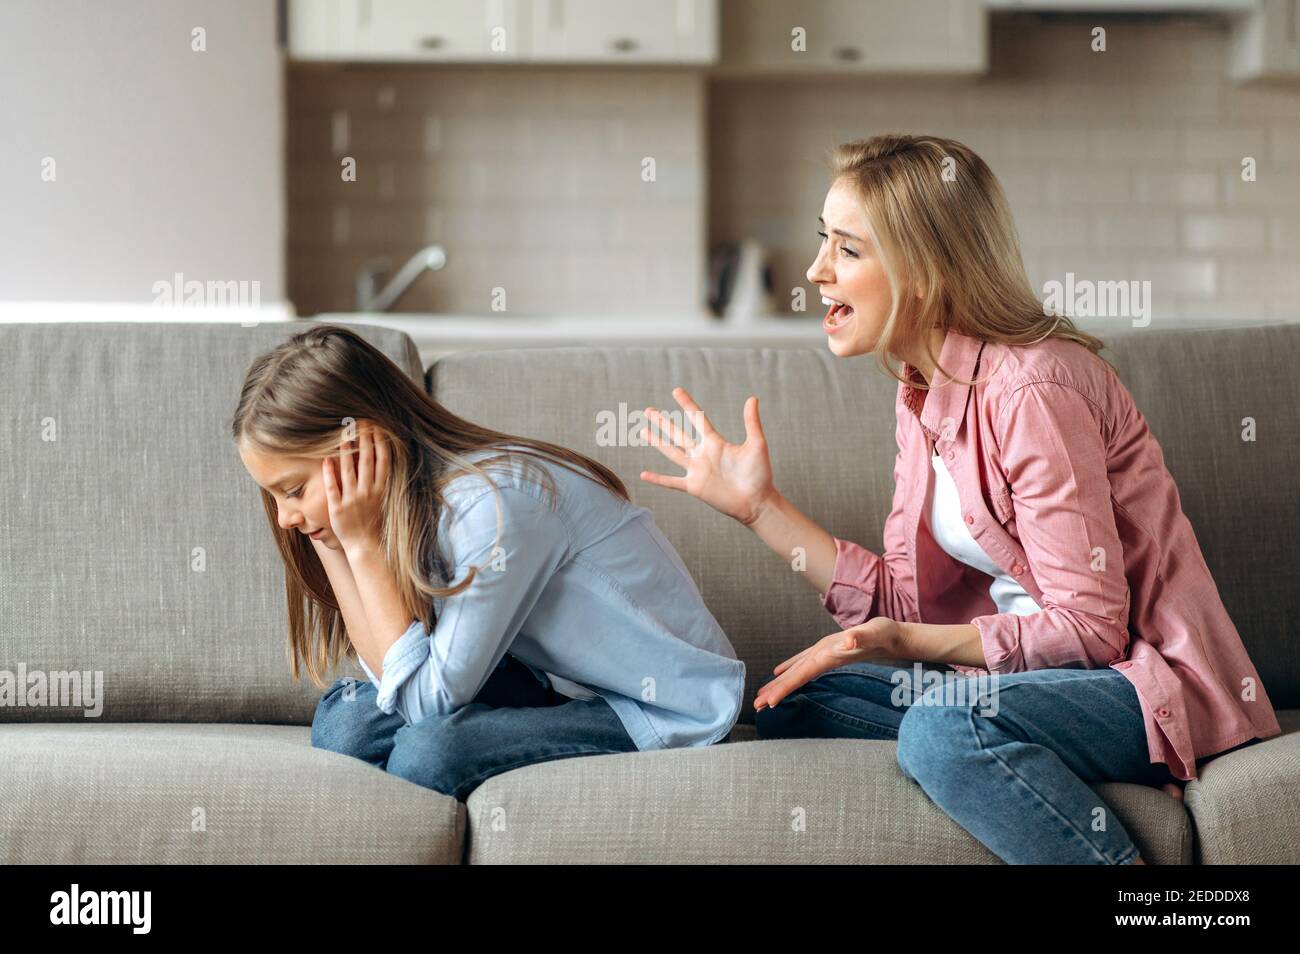 Conflict of mom and daughter. Screaming mother, shouts at little daughter scolding her. Little girl is ignoring mom, close her ears with arms. Complicated relationships of mother and child Stock Photo